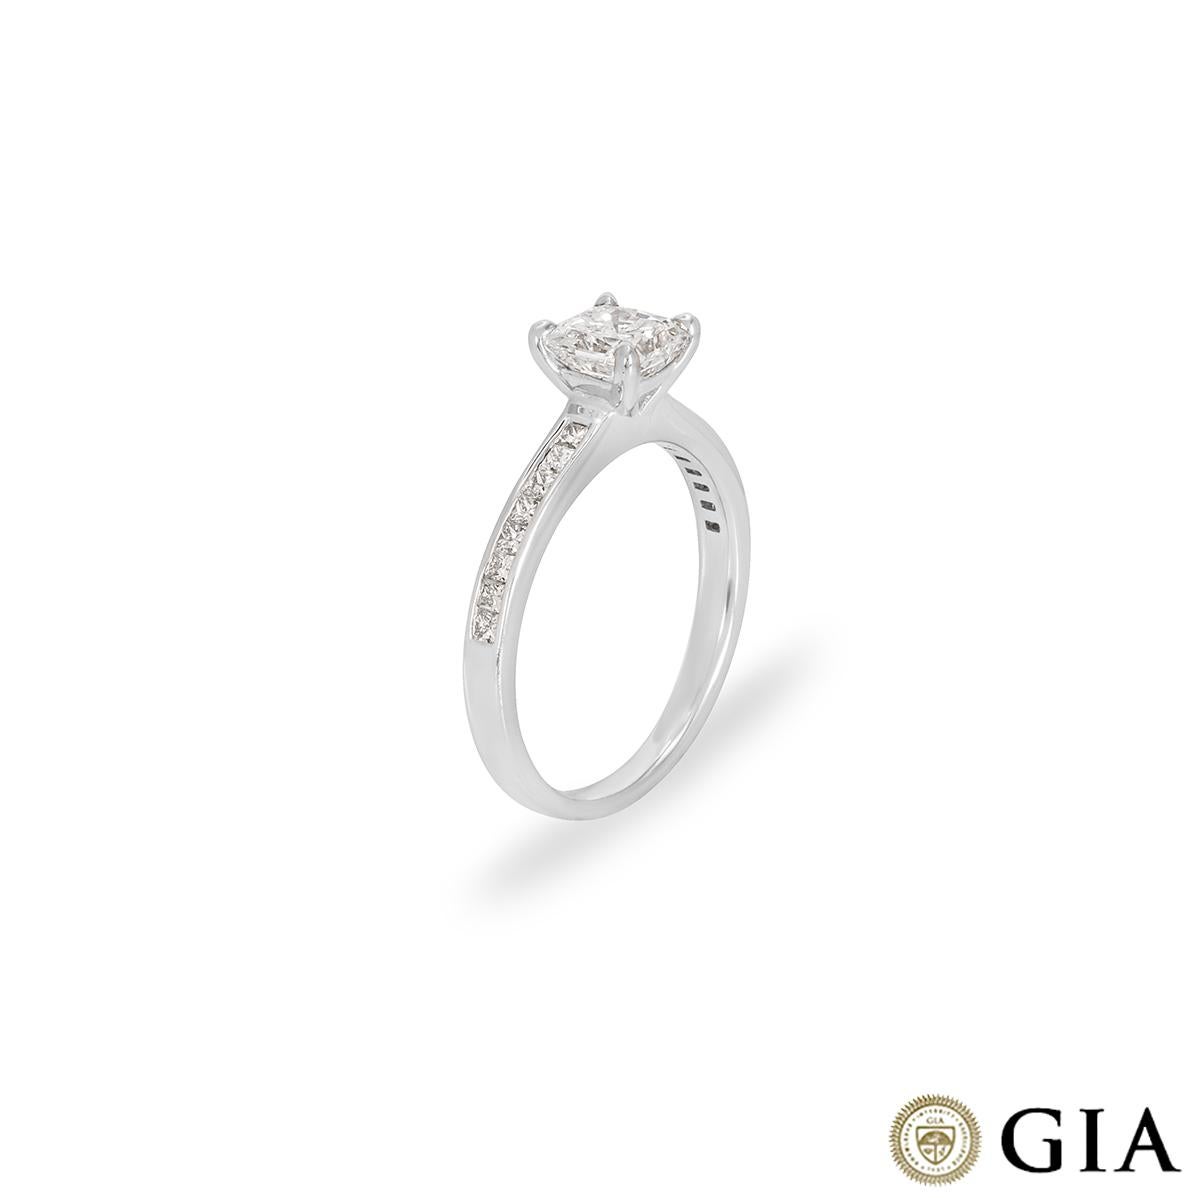 A radiant cut diamond ring set in 18k white gold. The radiant cut diamond weighs 1.01ct, the diamond is D colour and VVS2 clarity. The centre stone is set within four claws and has diamond set shoulders. The 16 princess cut side stones are well